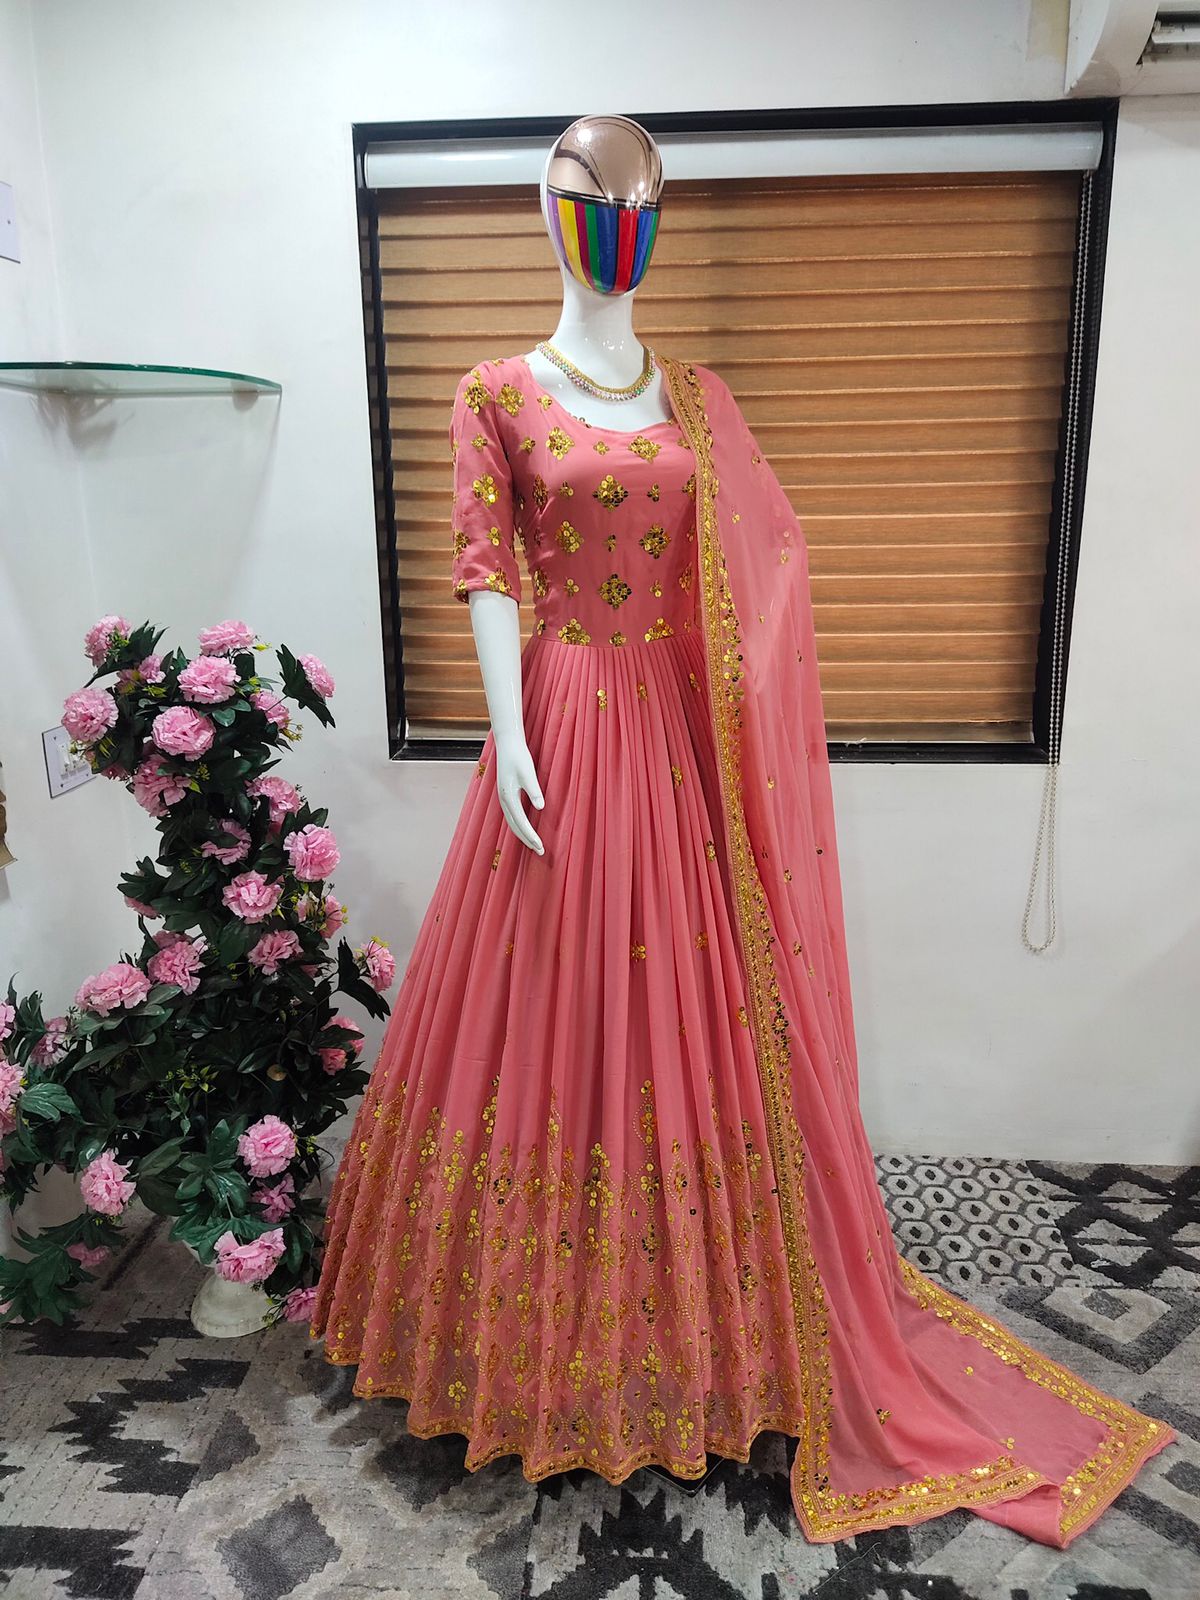 New) Latest Gown Design 2021 2022 For Girl Rs.1999